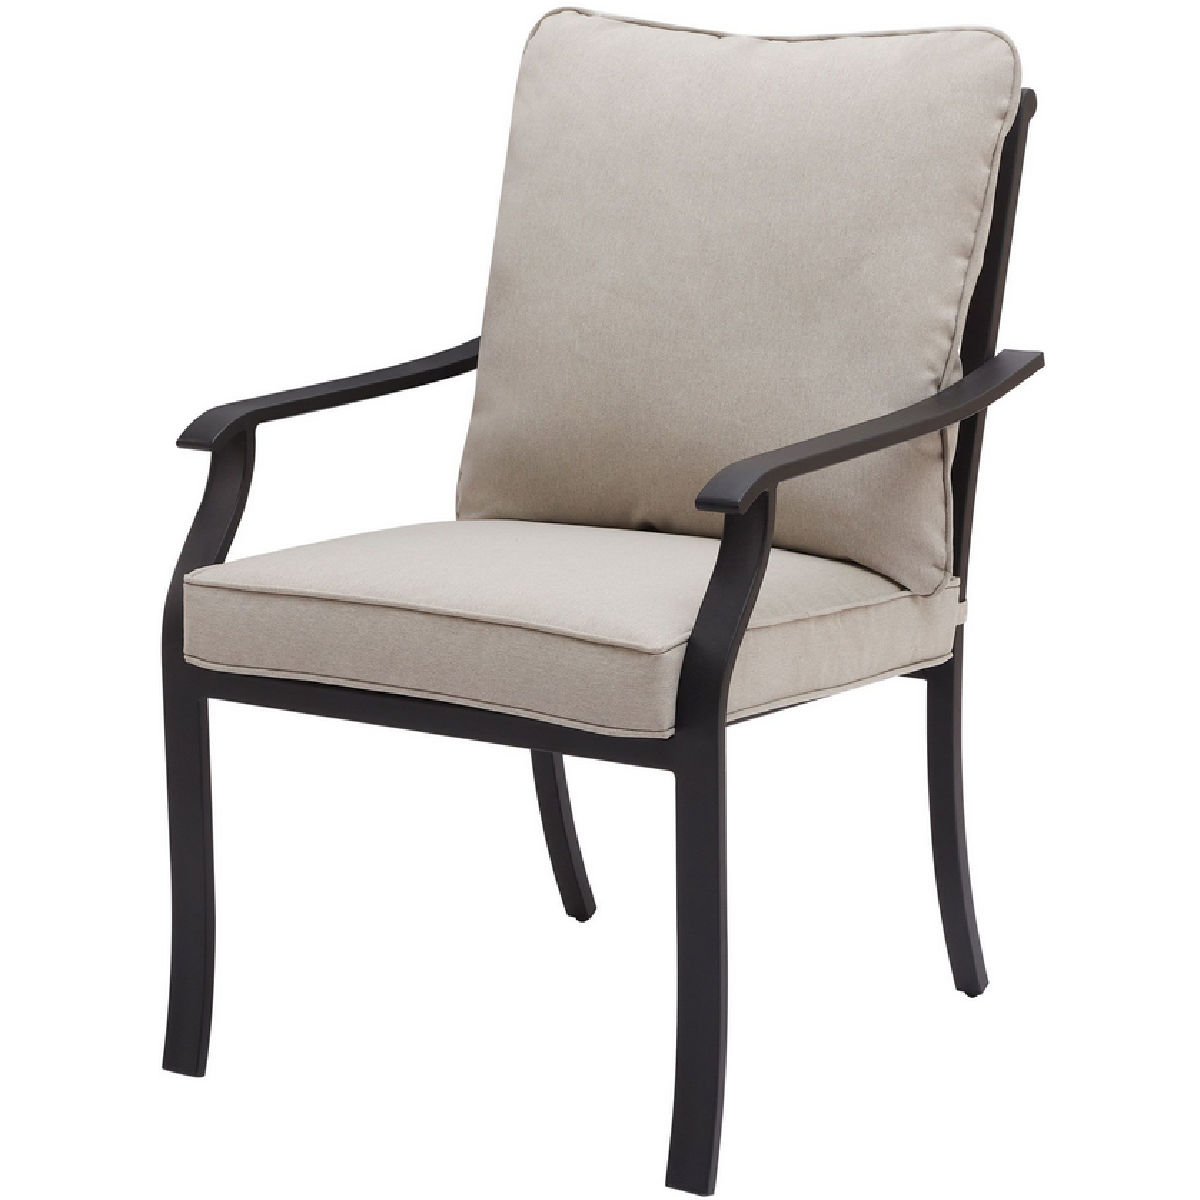 Better Homes & Gardens Newport Outdoor Stationary Dining Chairs